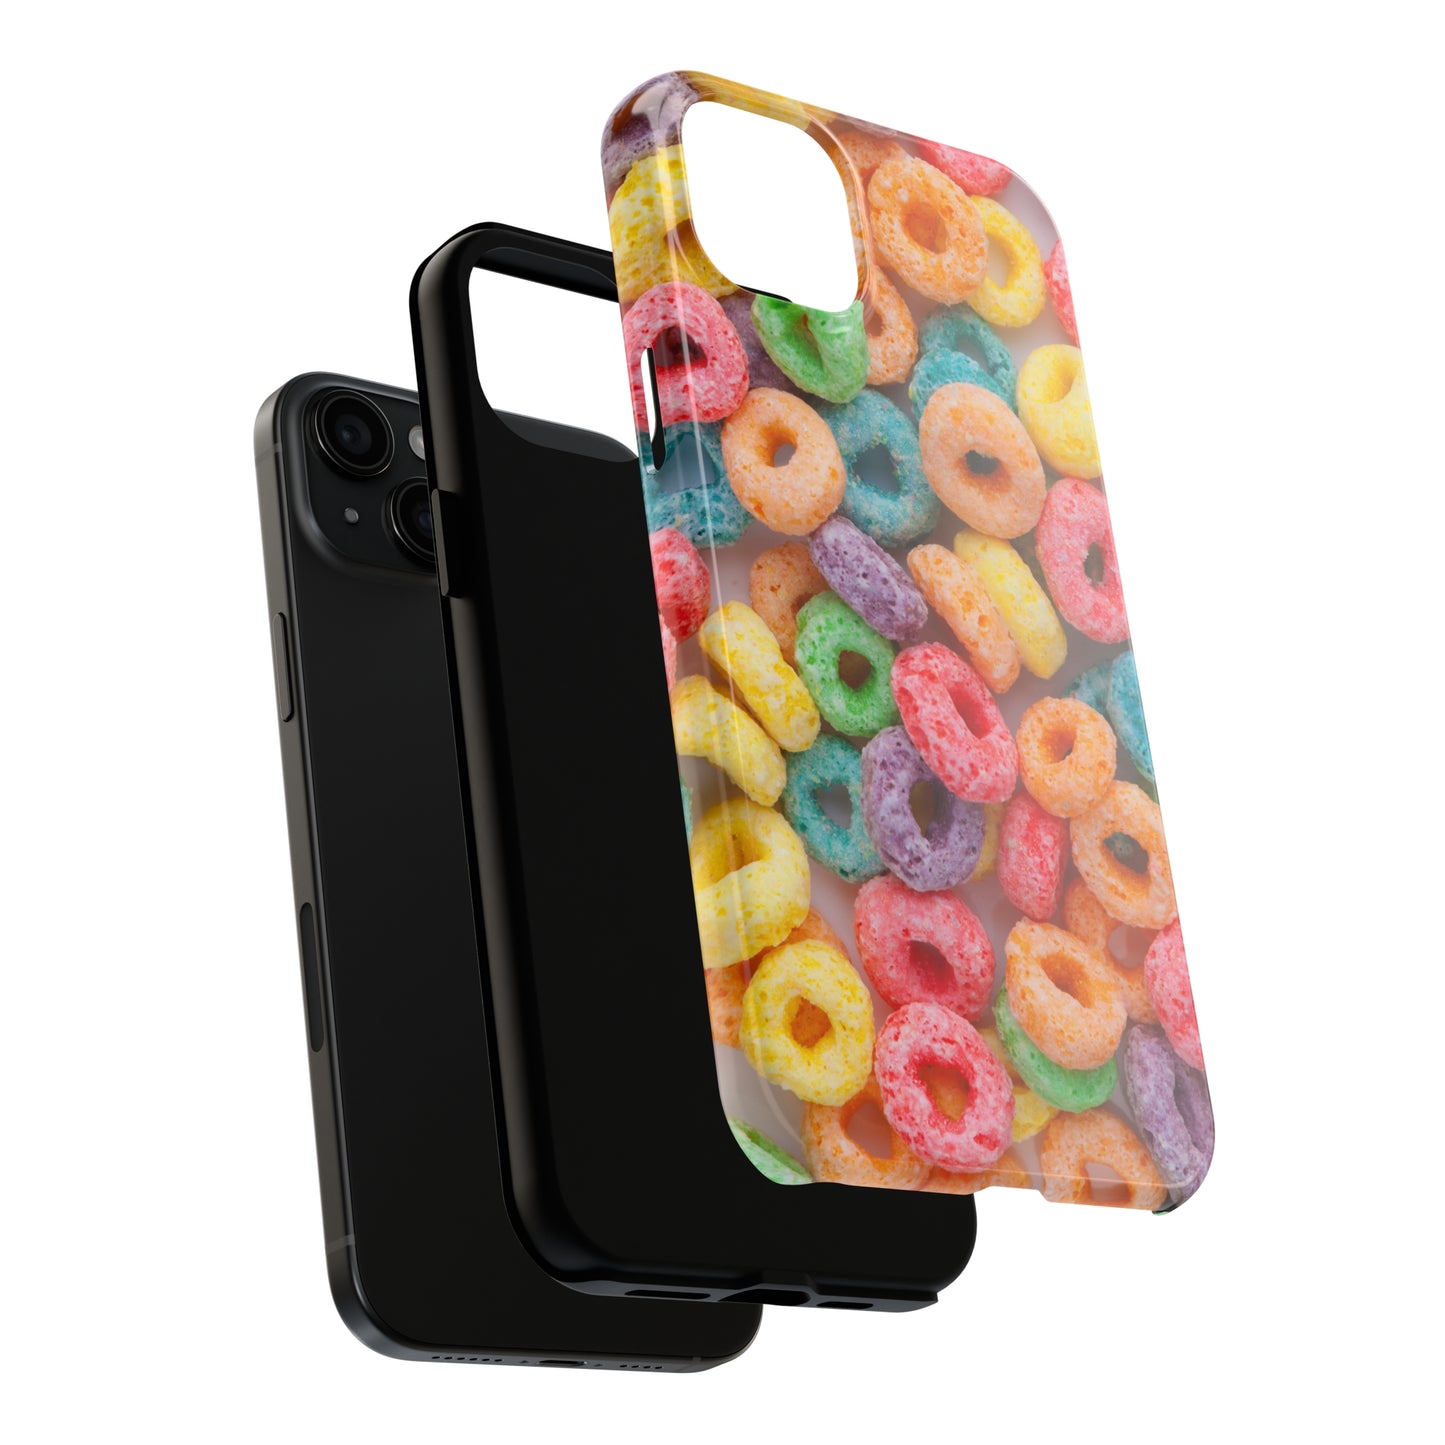 Morning Cereal Loops Phone Case